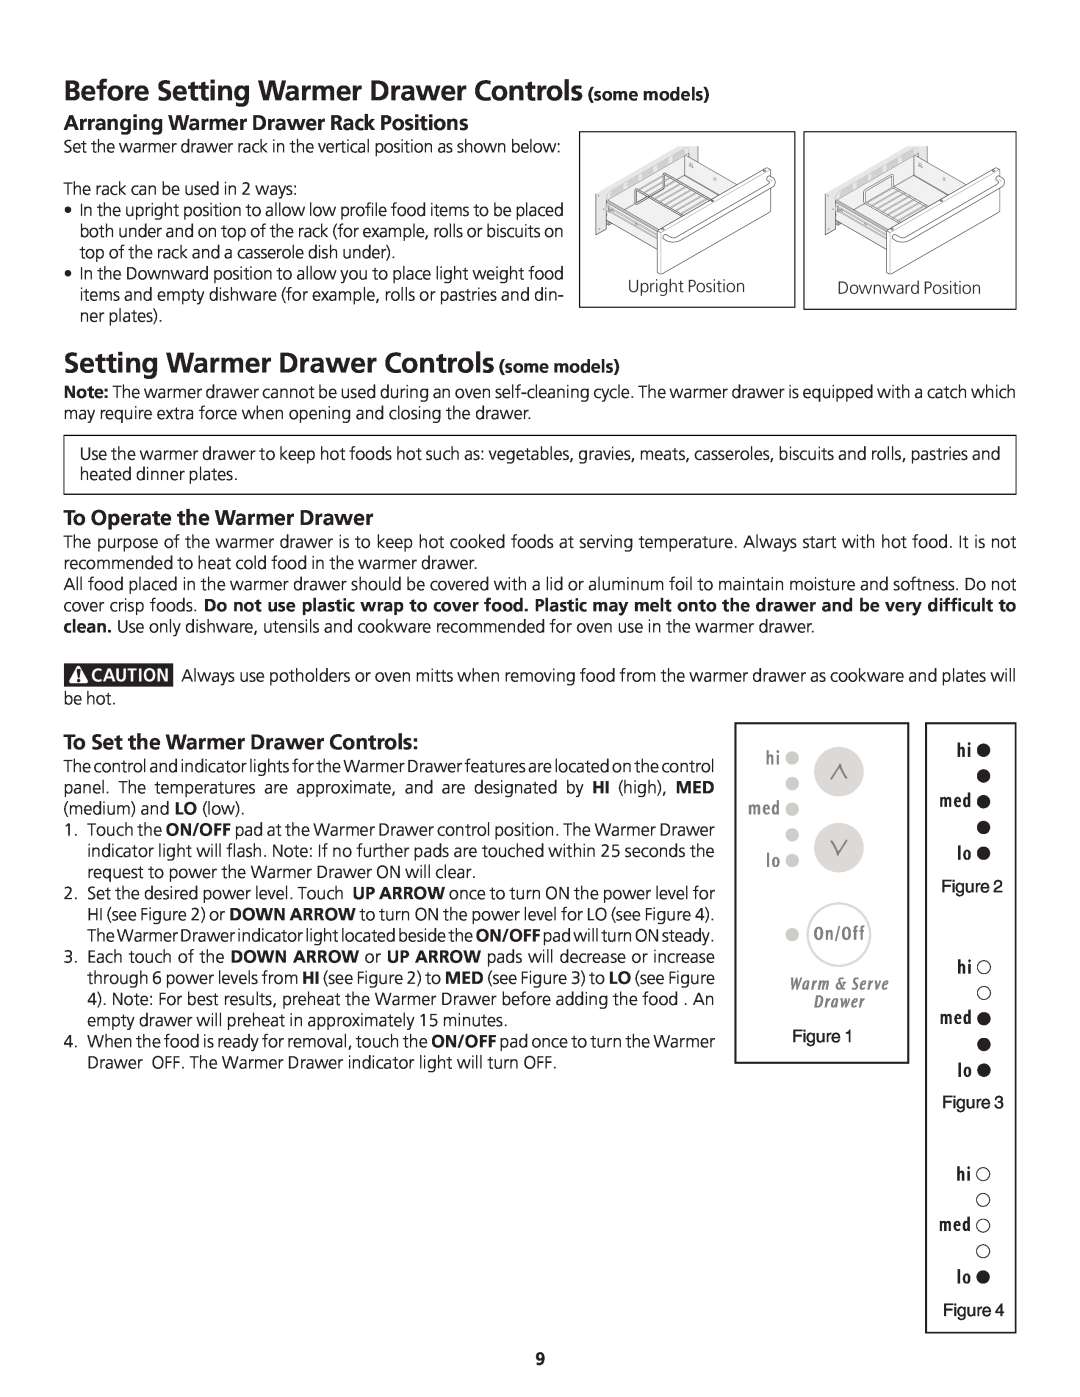 Frigidaire 318200869 manual Before Setting Warmer Drawer Controls some models, Arranging Warmer Drawer Rack Positions 